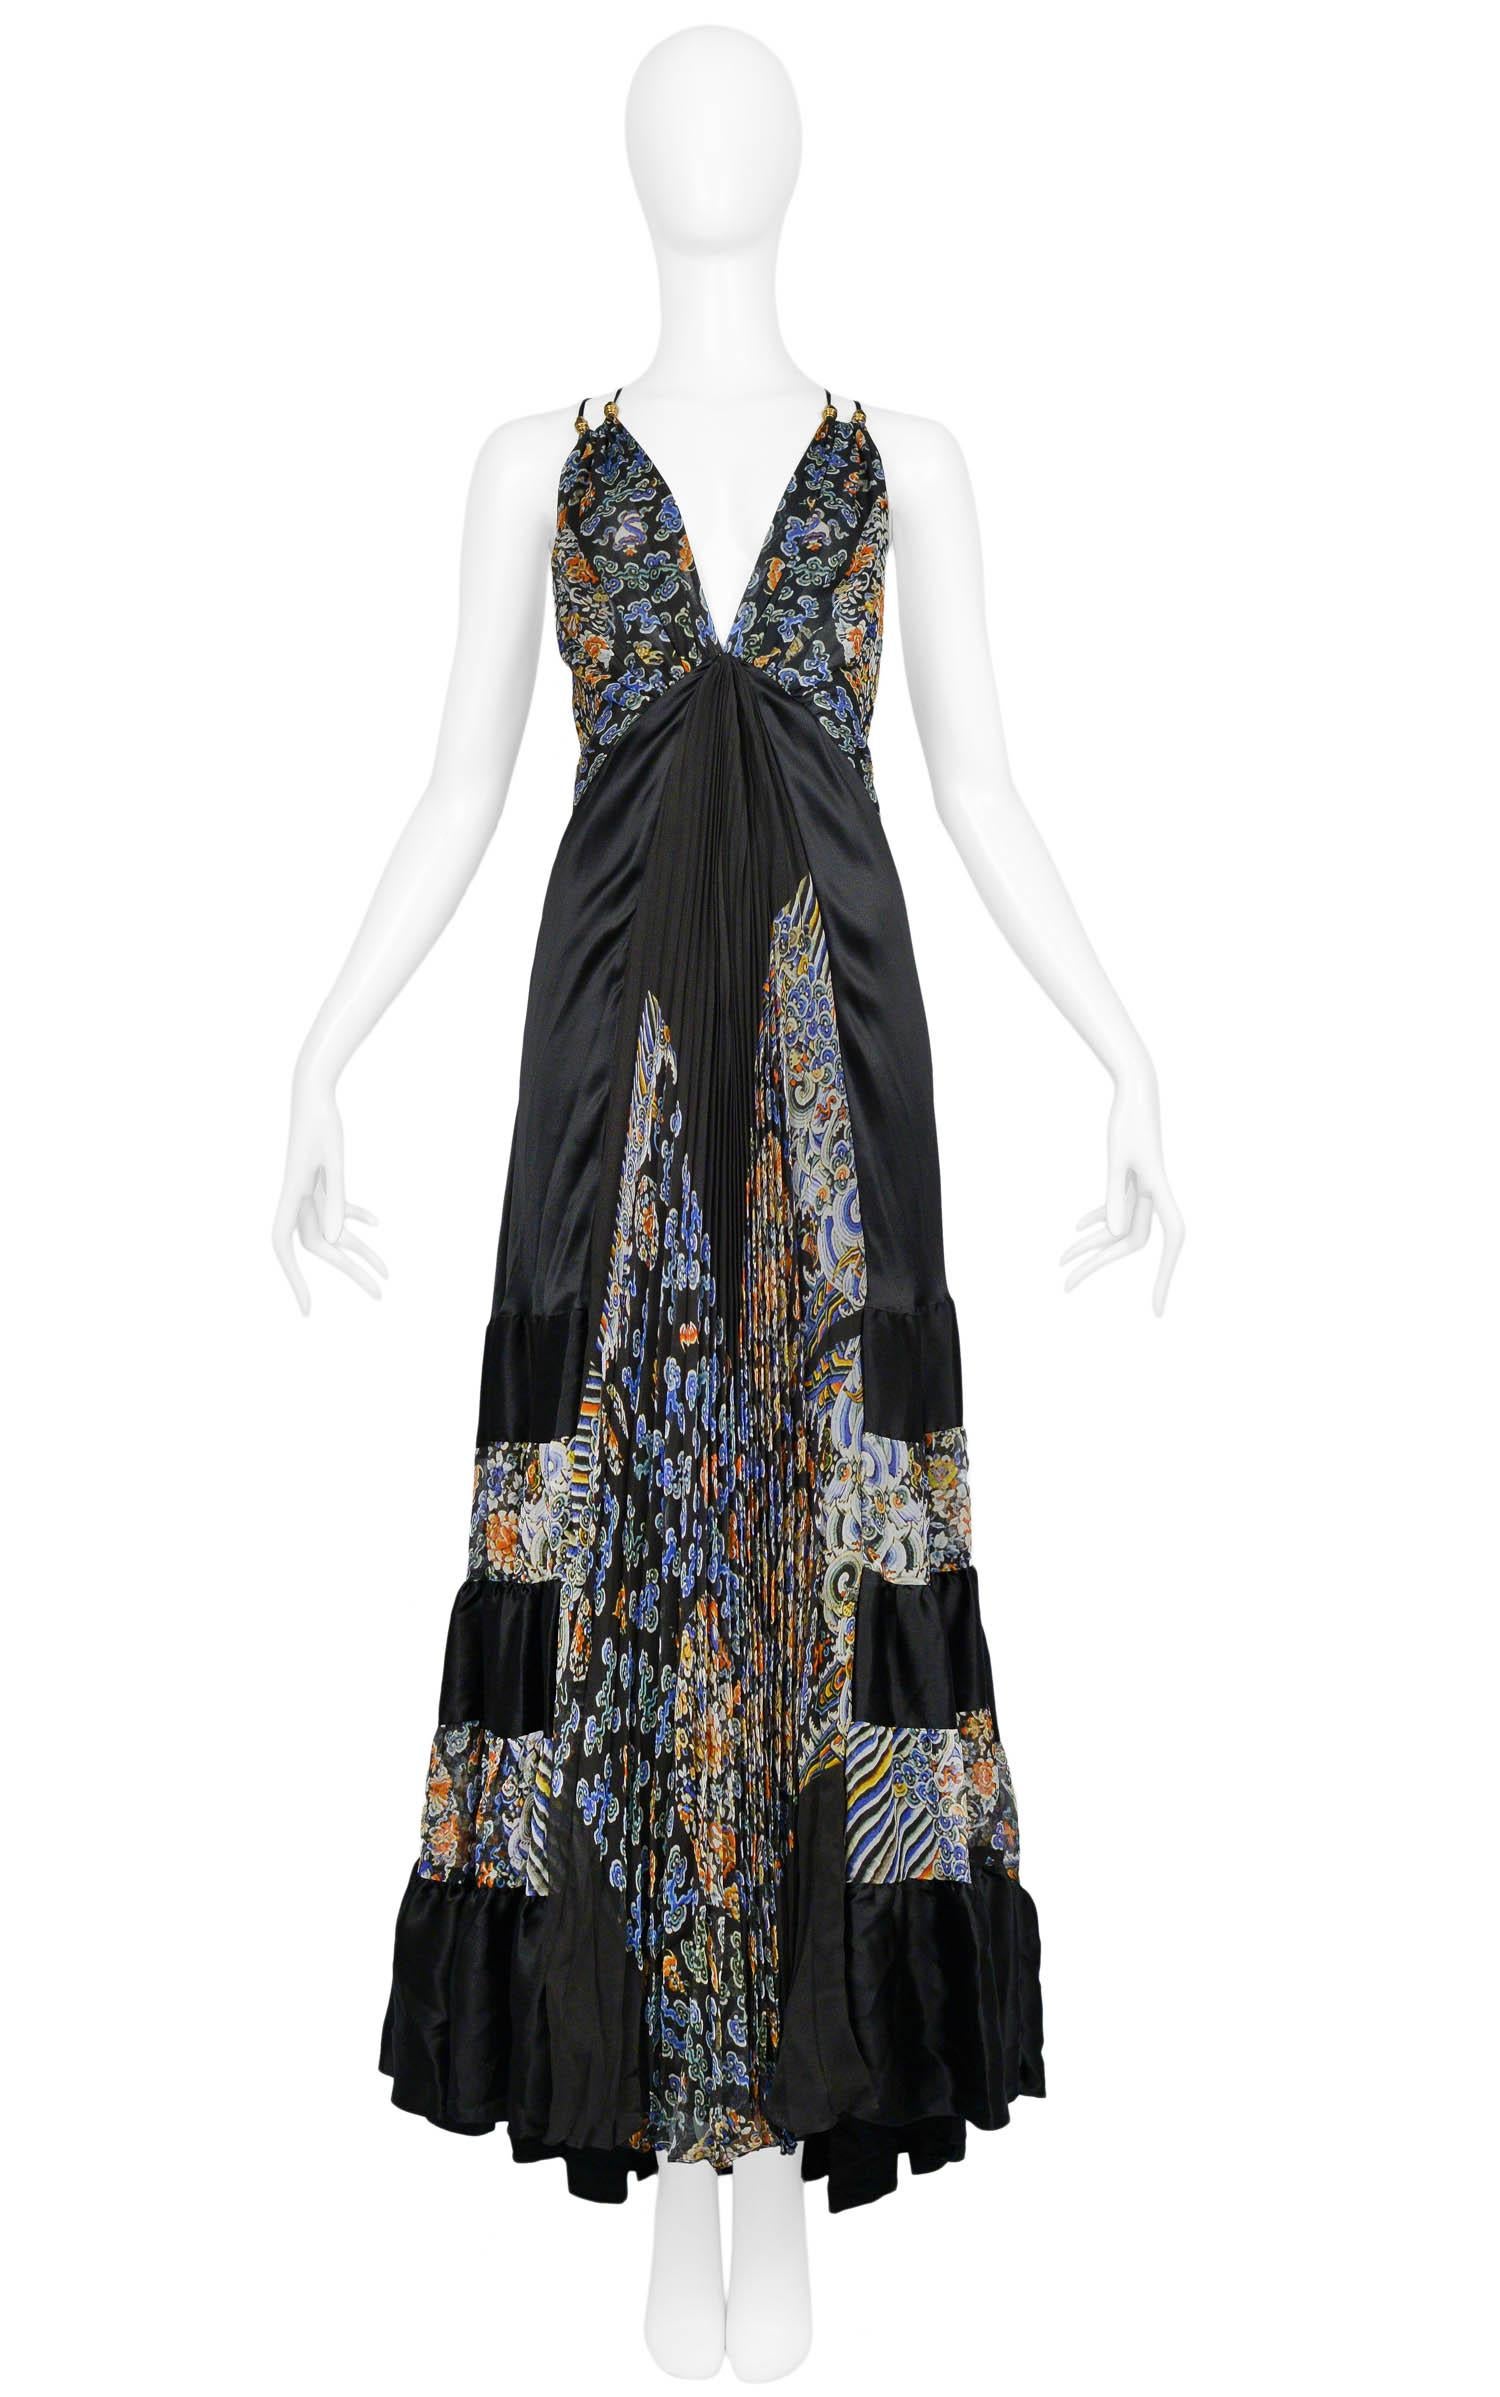 Vintage Nicolas Ghesquière for Balenciaga black silk maxi gown with halter plunge neckline featuring Chinese printed paneling throughout, gold tone hardware at straps, accordion pleating down the center front & multi tiered flounce at the hem. From